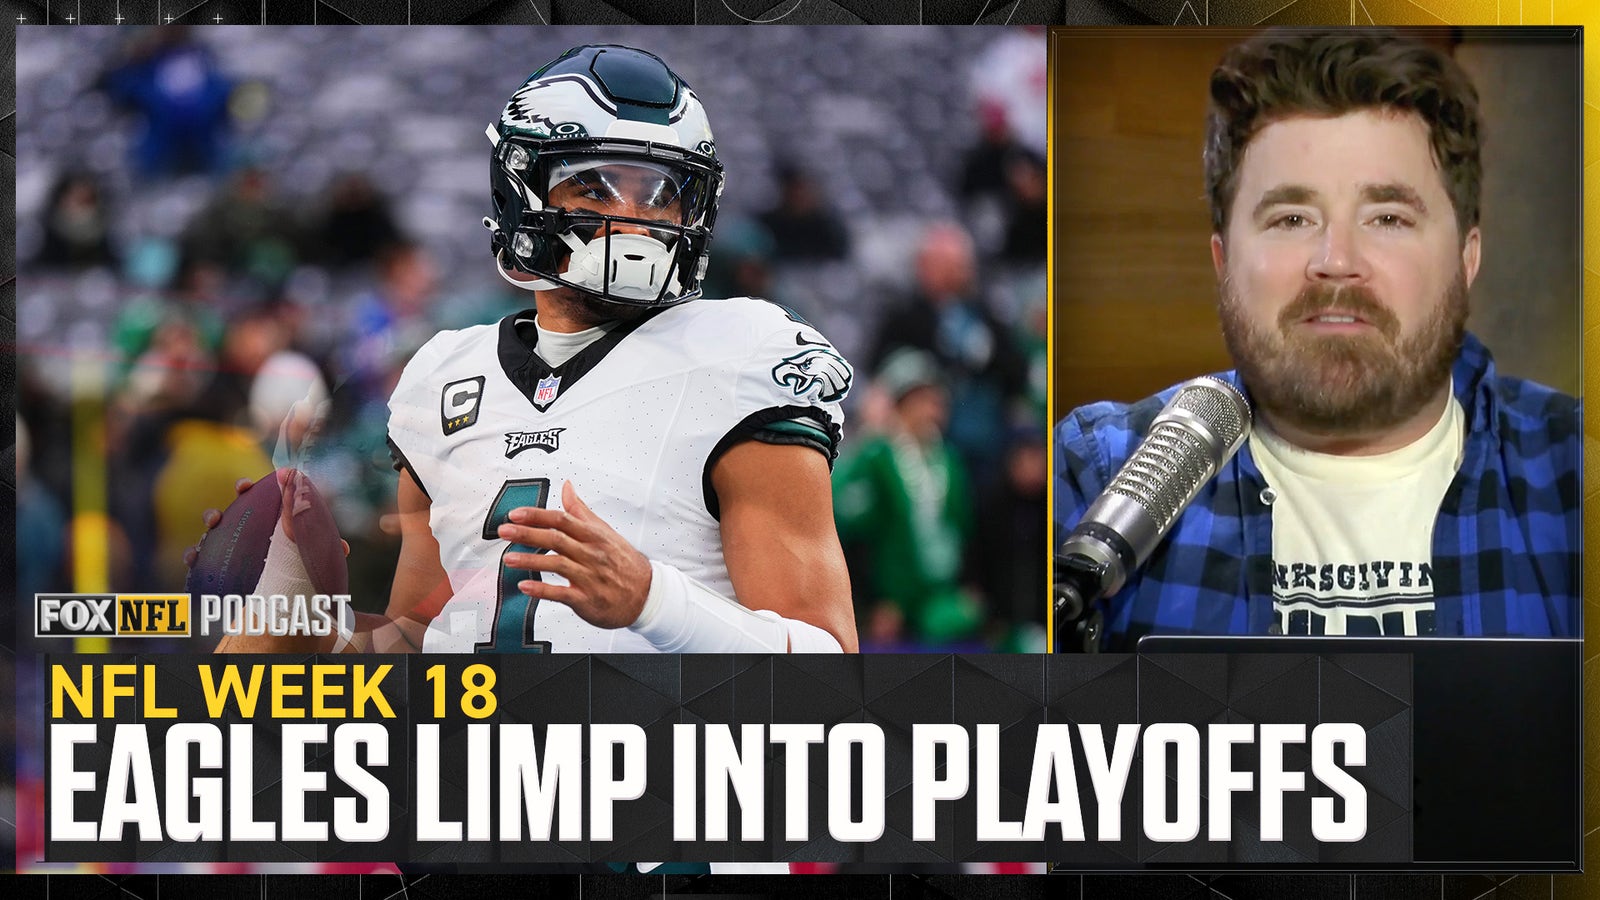 Can the Eagles turn around their season after a rough finish?